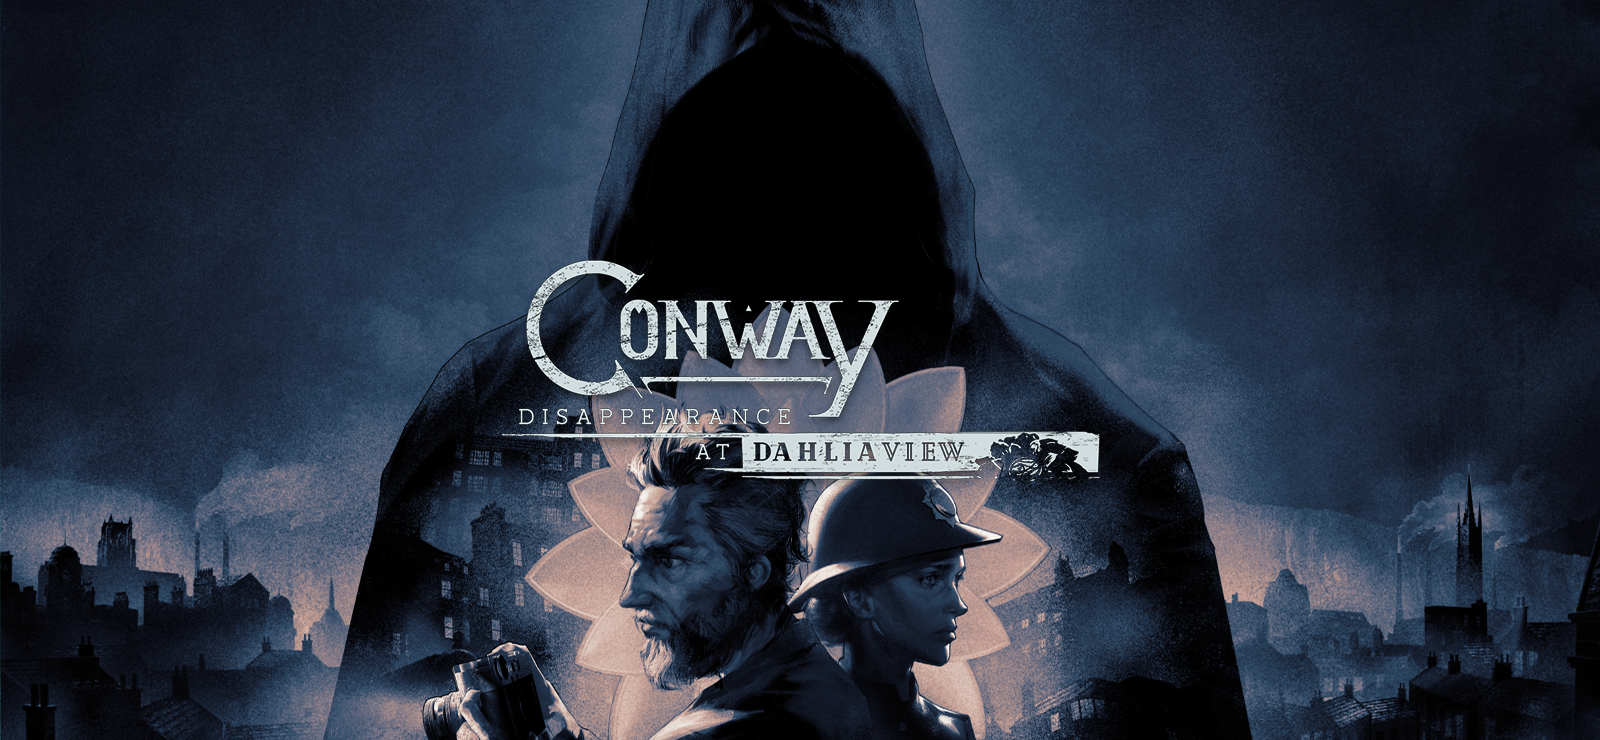 Conway: Disappearance At Dahlia View Digital Deluxe